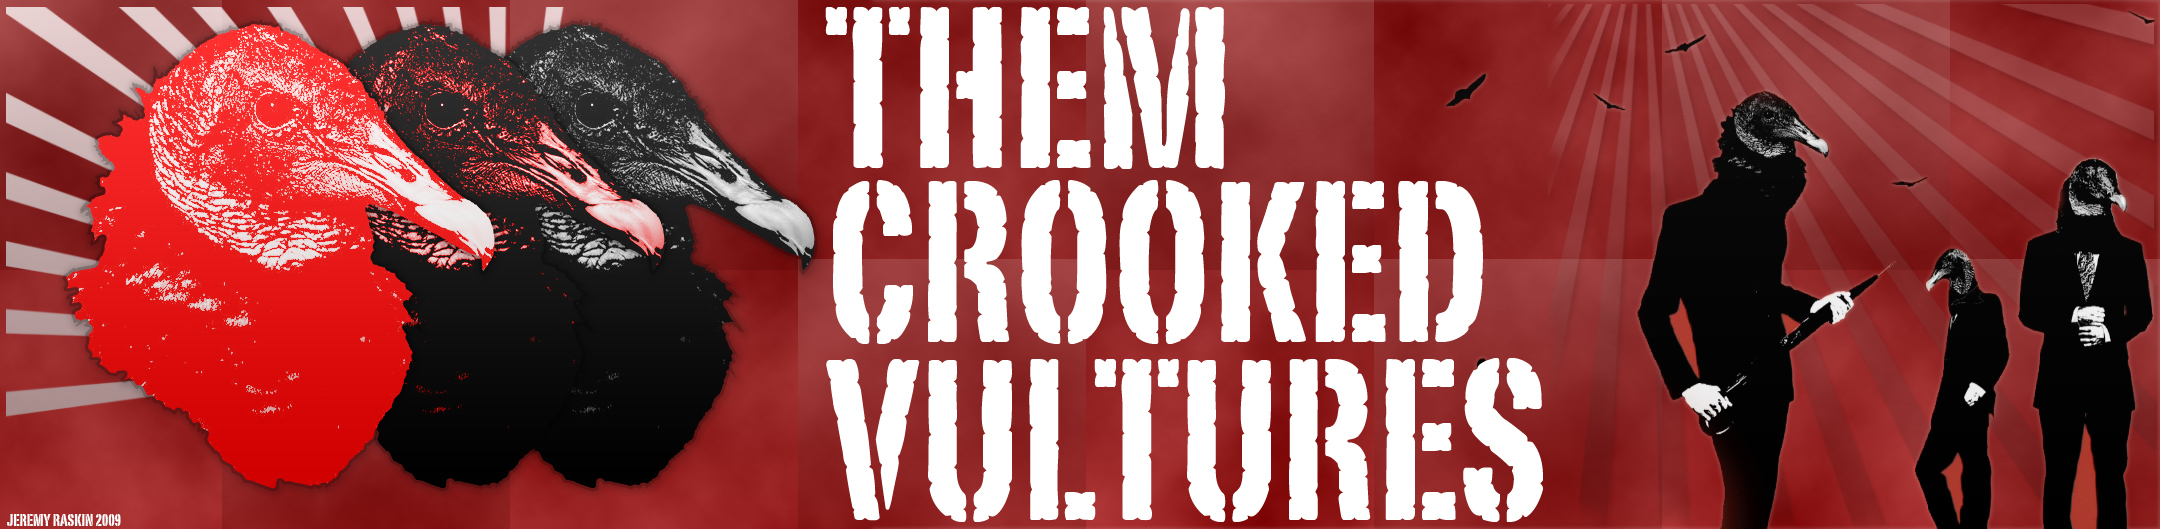 Them Crooked Vultures Jpg